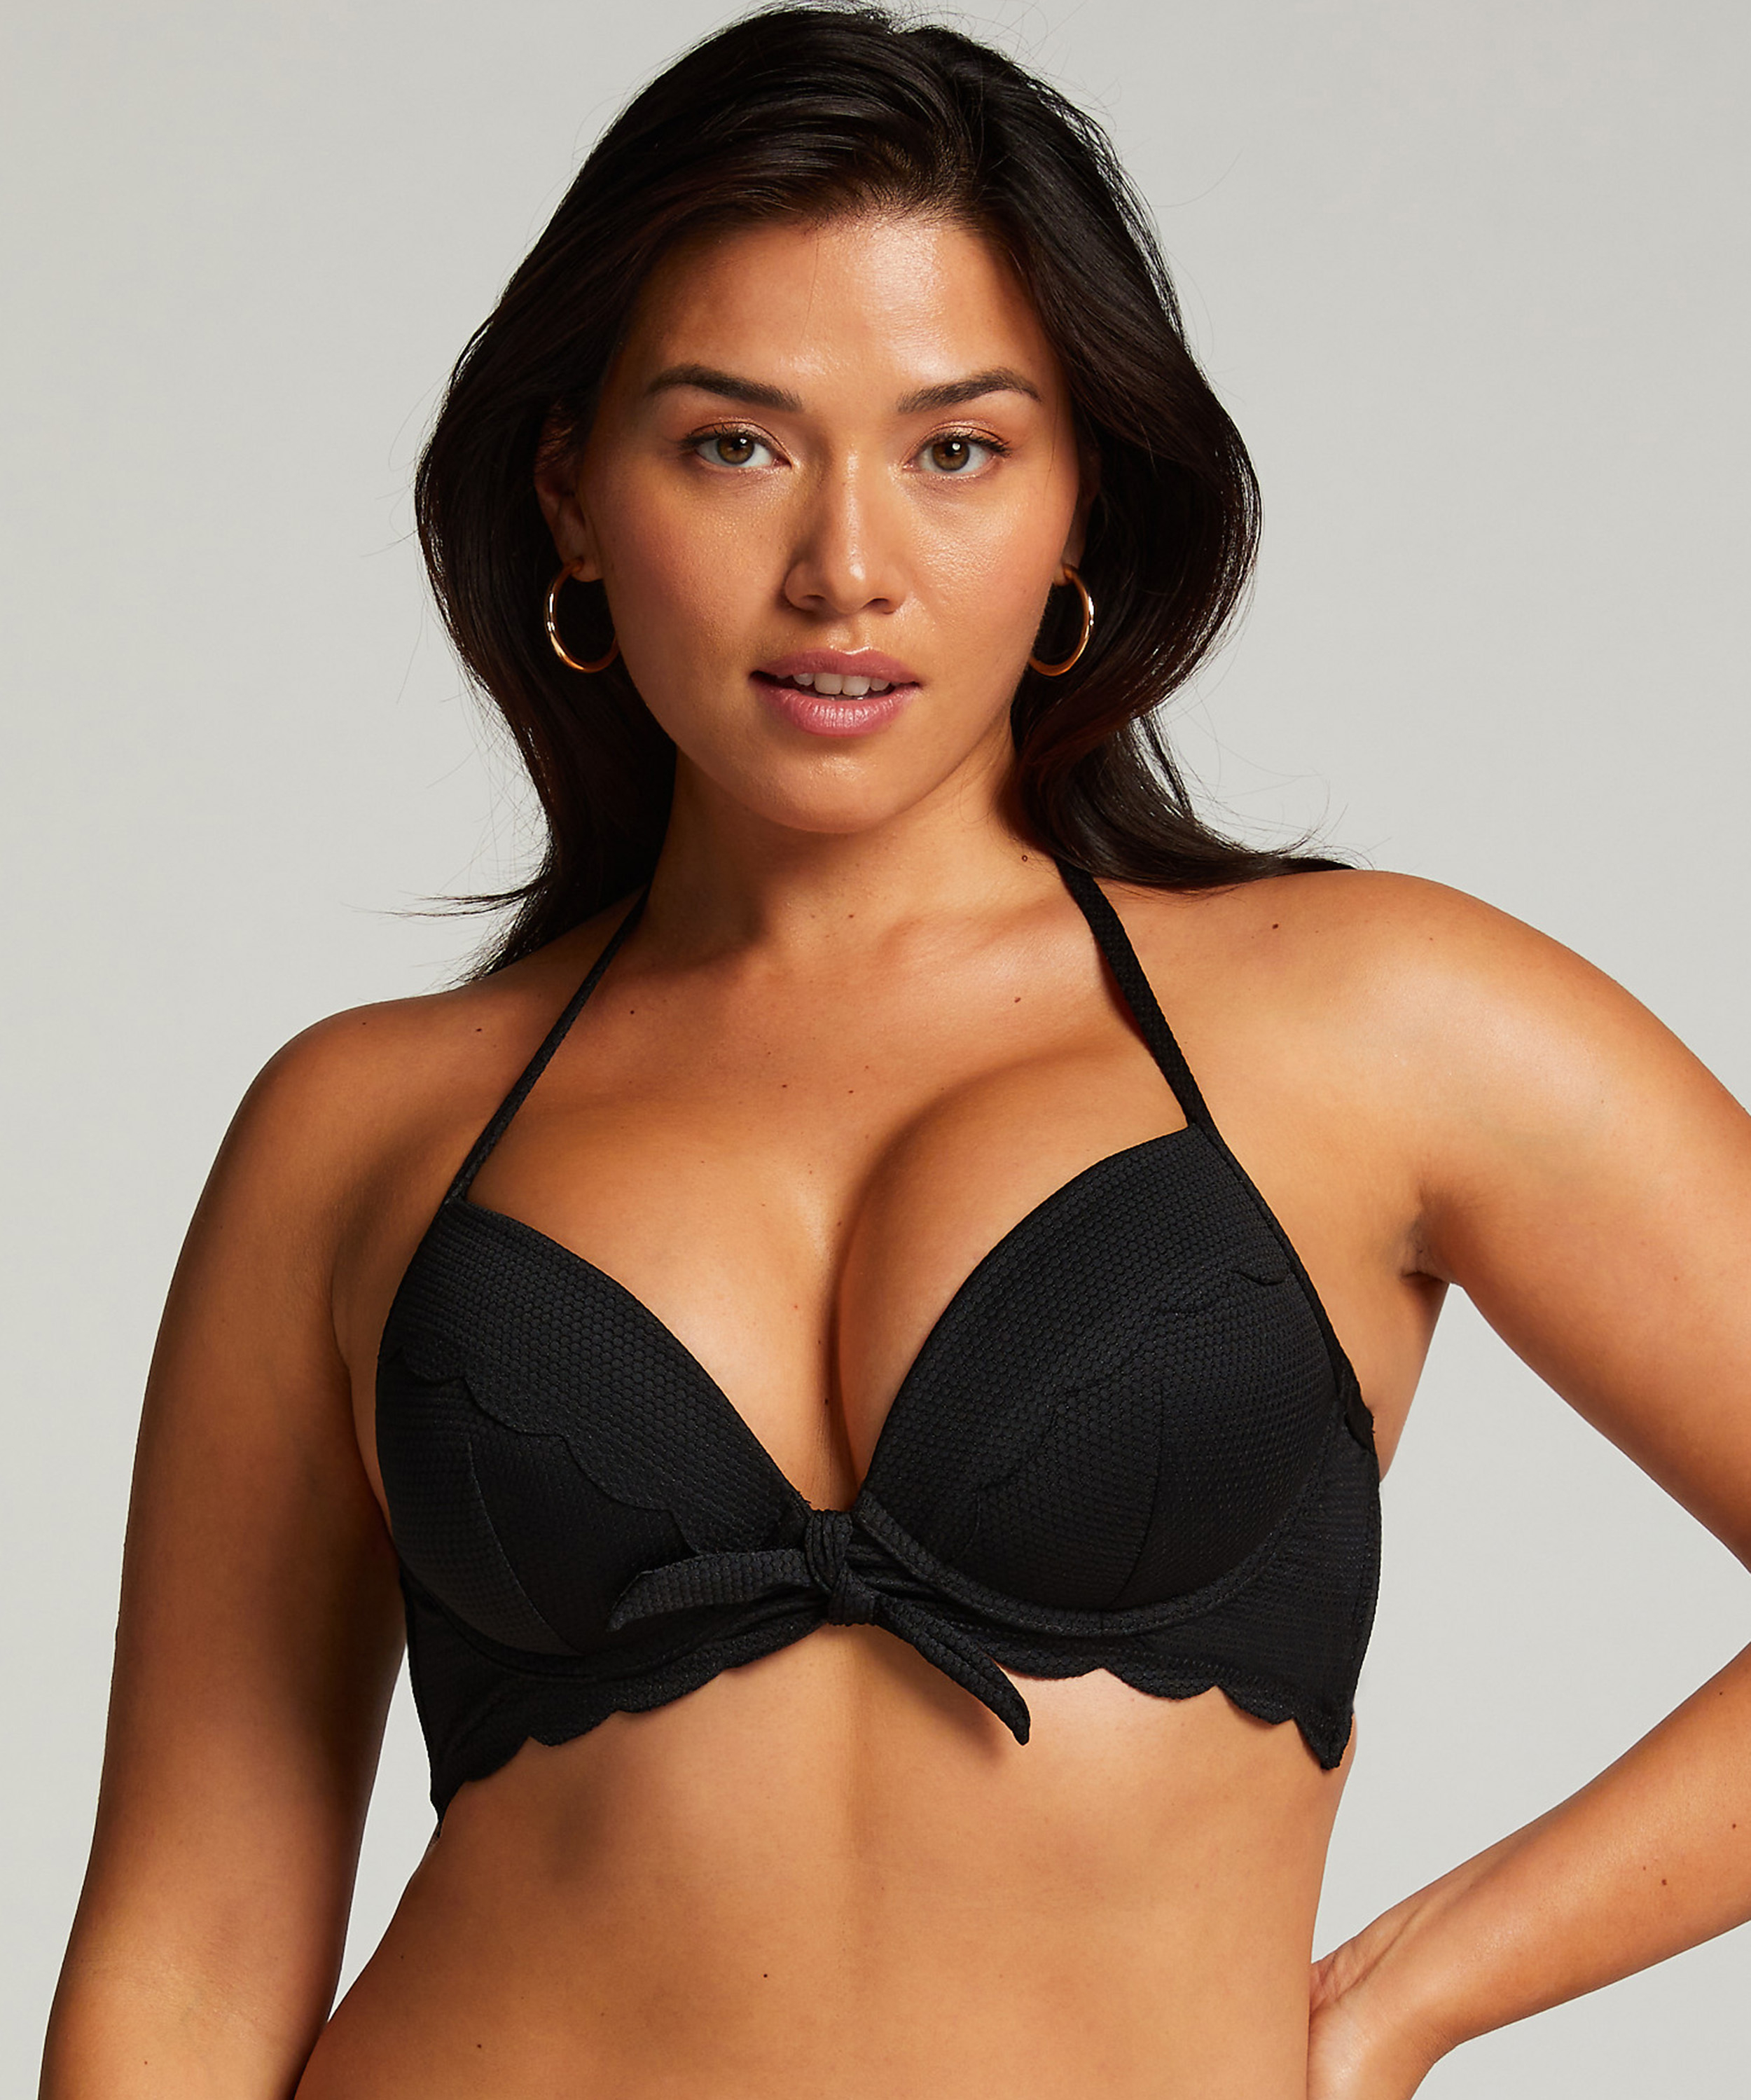 Scallop push-up underwired bikini top Cup A - E for €34.99 - Perfect Plunge  - Hunkemöller